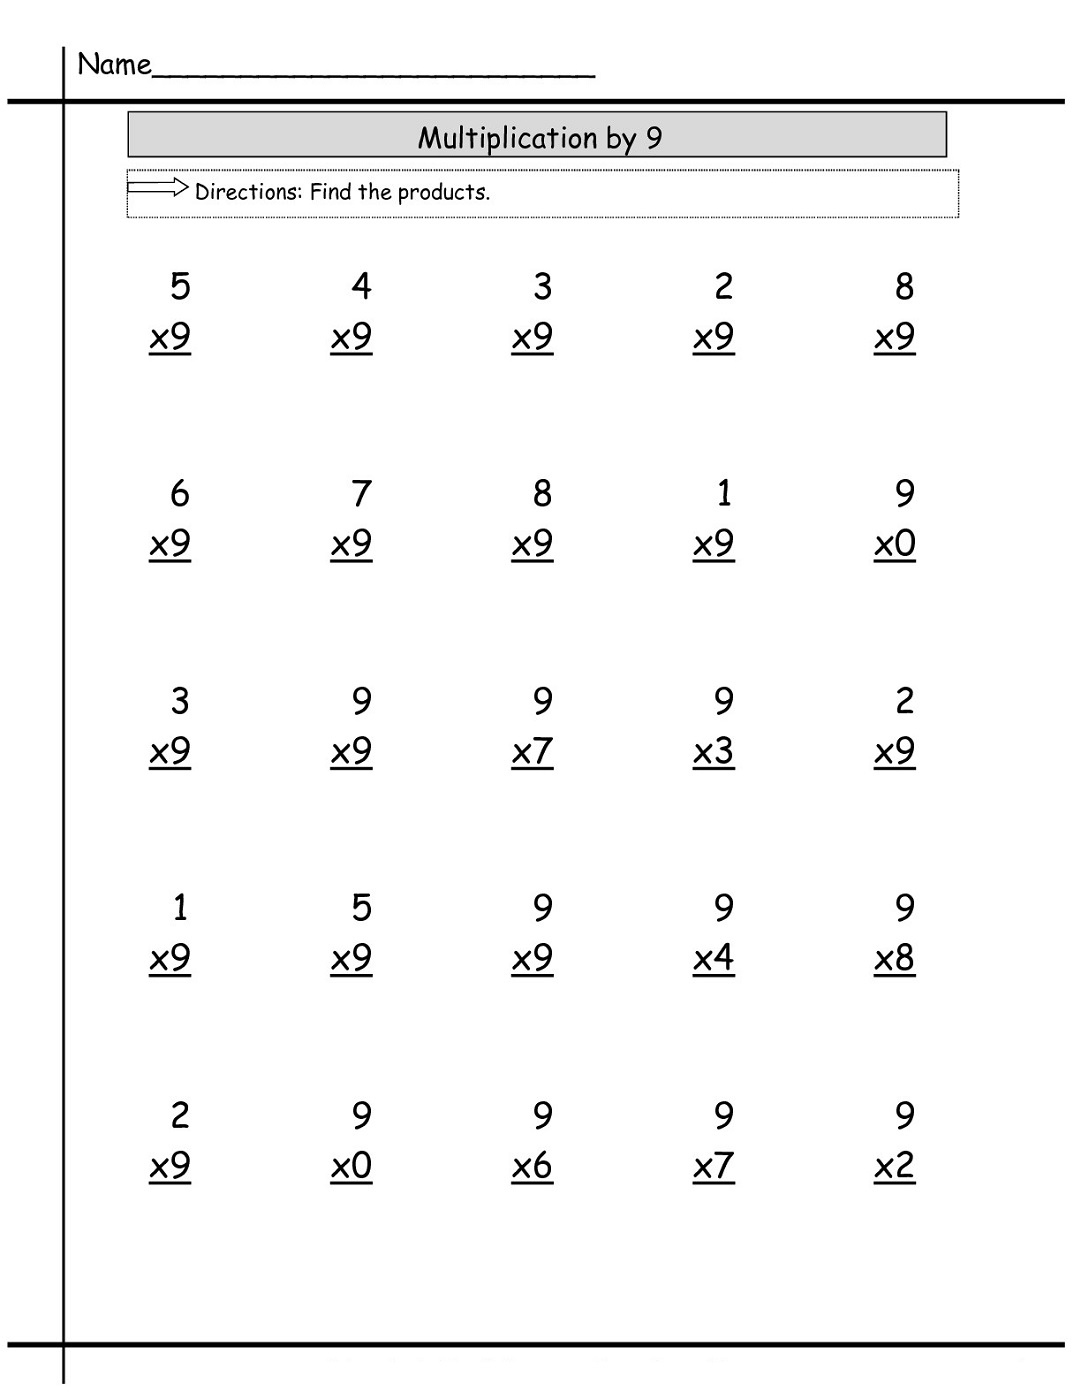 Multiply9 Worksheets | Printable Shelter with Printable Multiplication 9